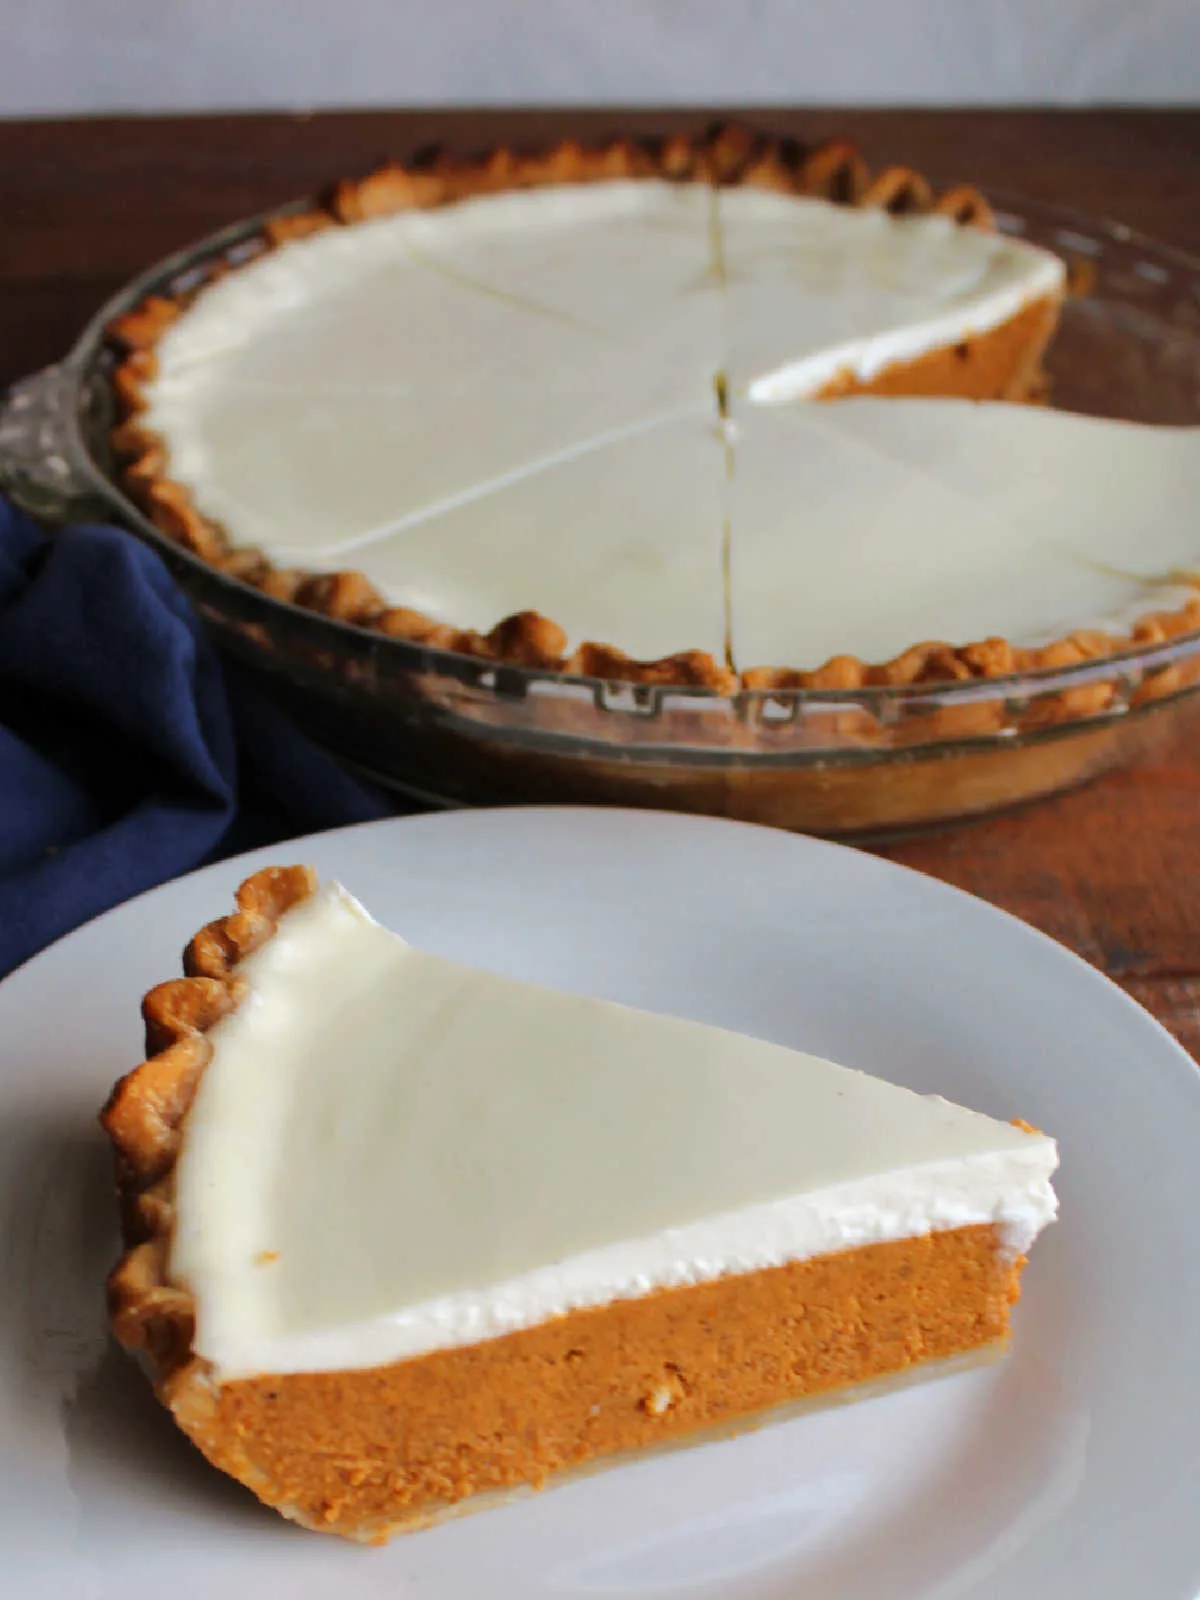 Piece of layered pumpkin pie with sour cream topping served on white plate with remaining pie in background. 